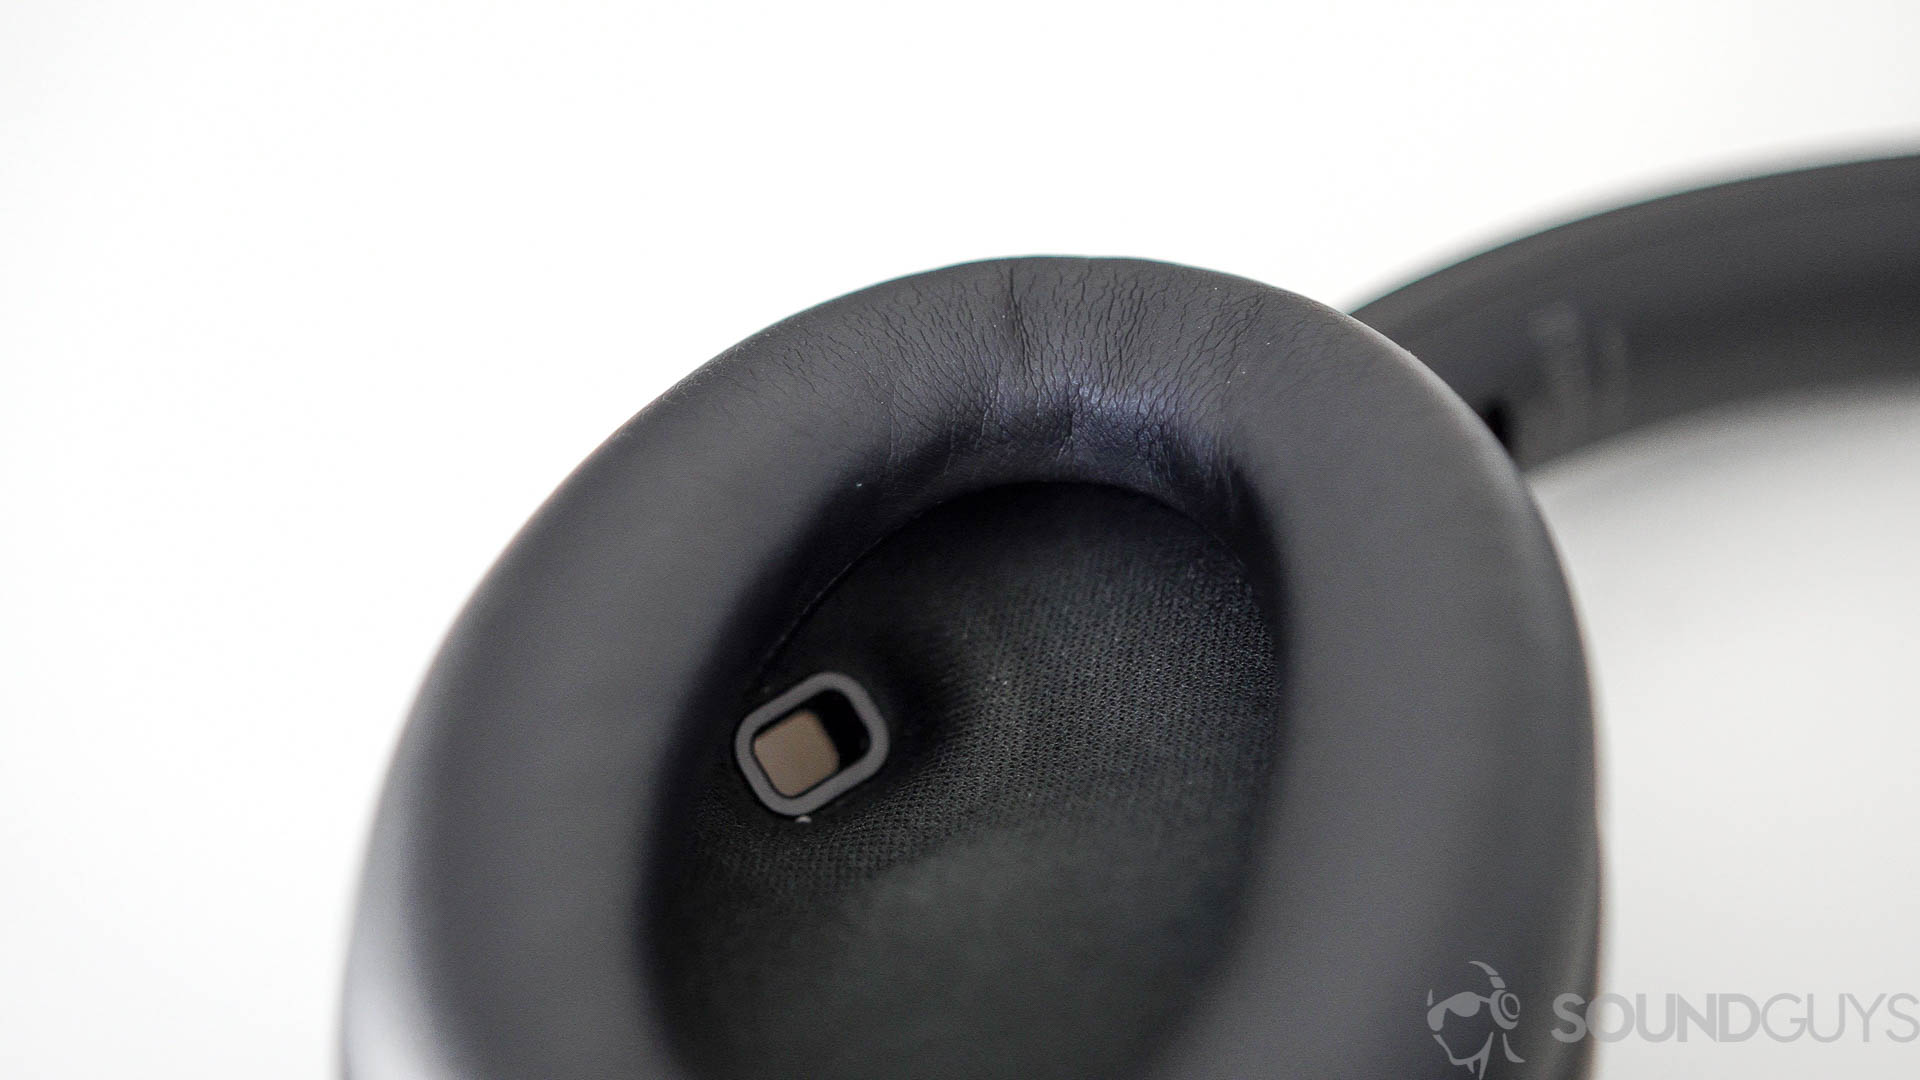 The proximity sensor on the inside of the left earcup of the Sony WH-1000XM4 headphones.